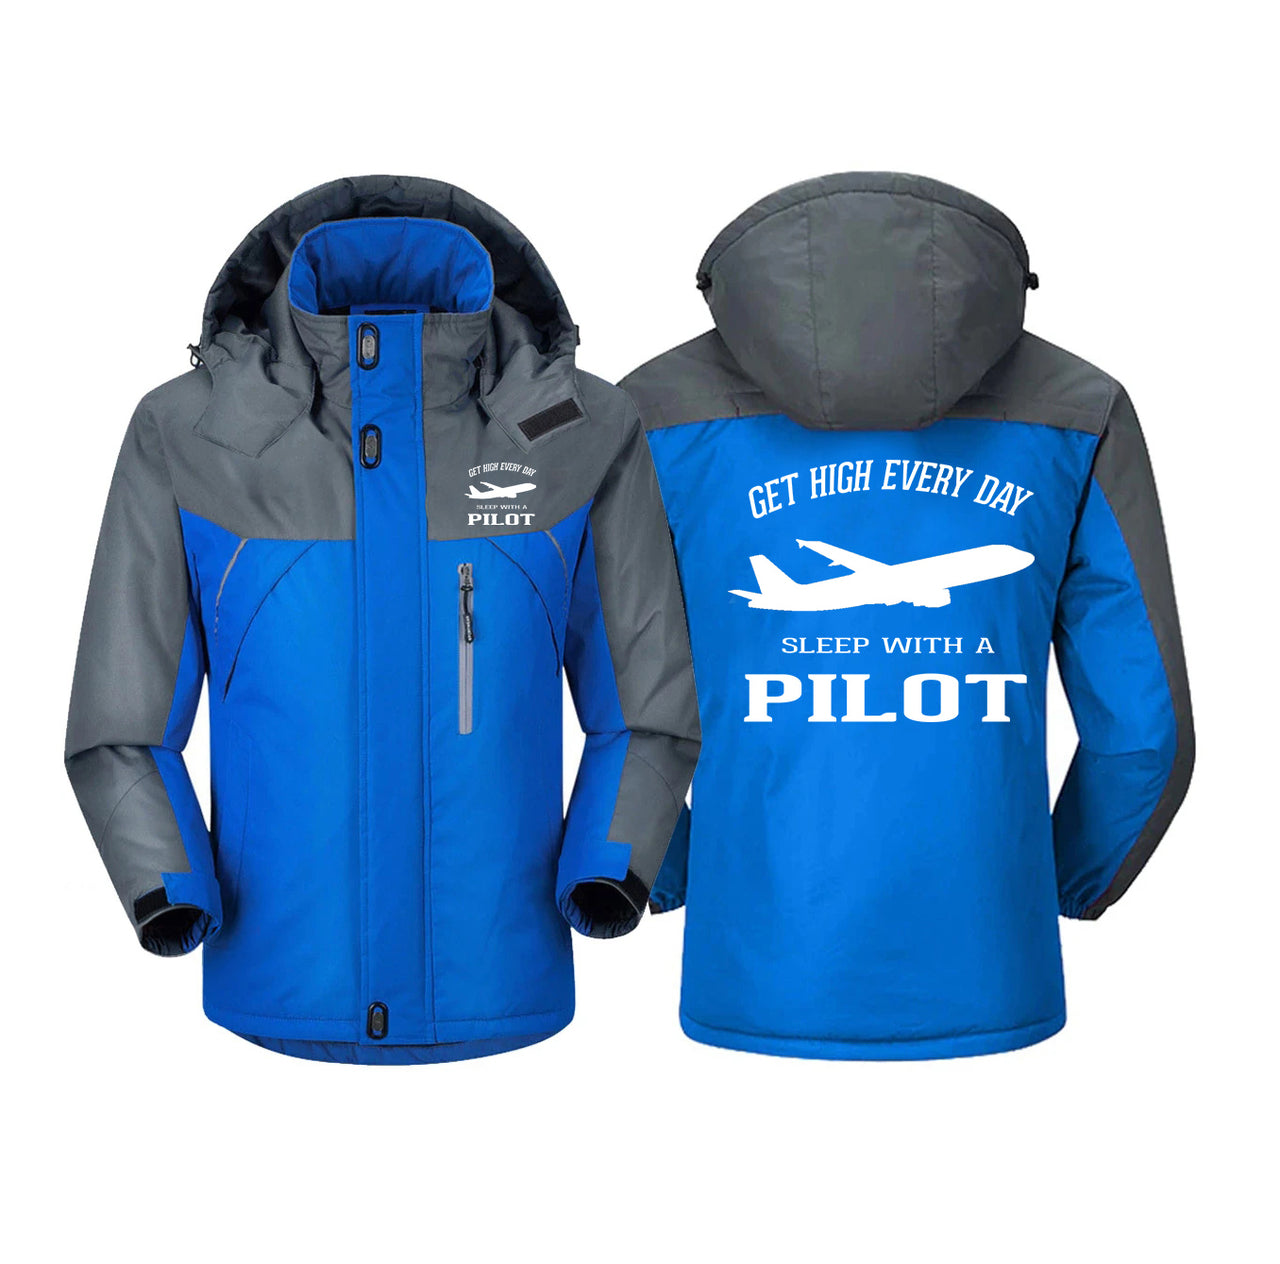 Get High Every Day Sleep With A Pilot Designed Thick Winter Jackets